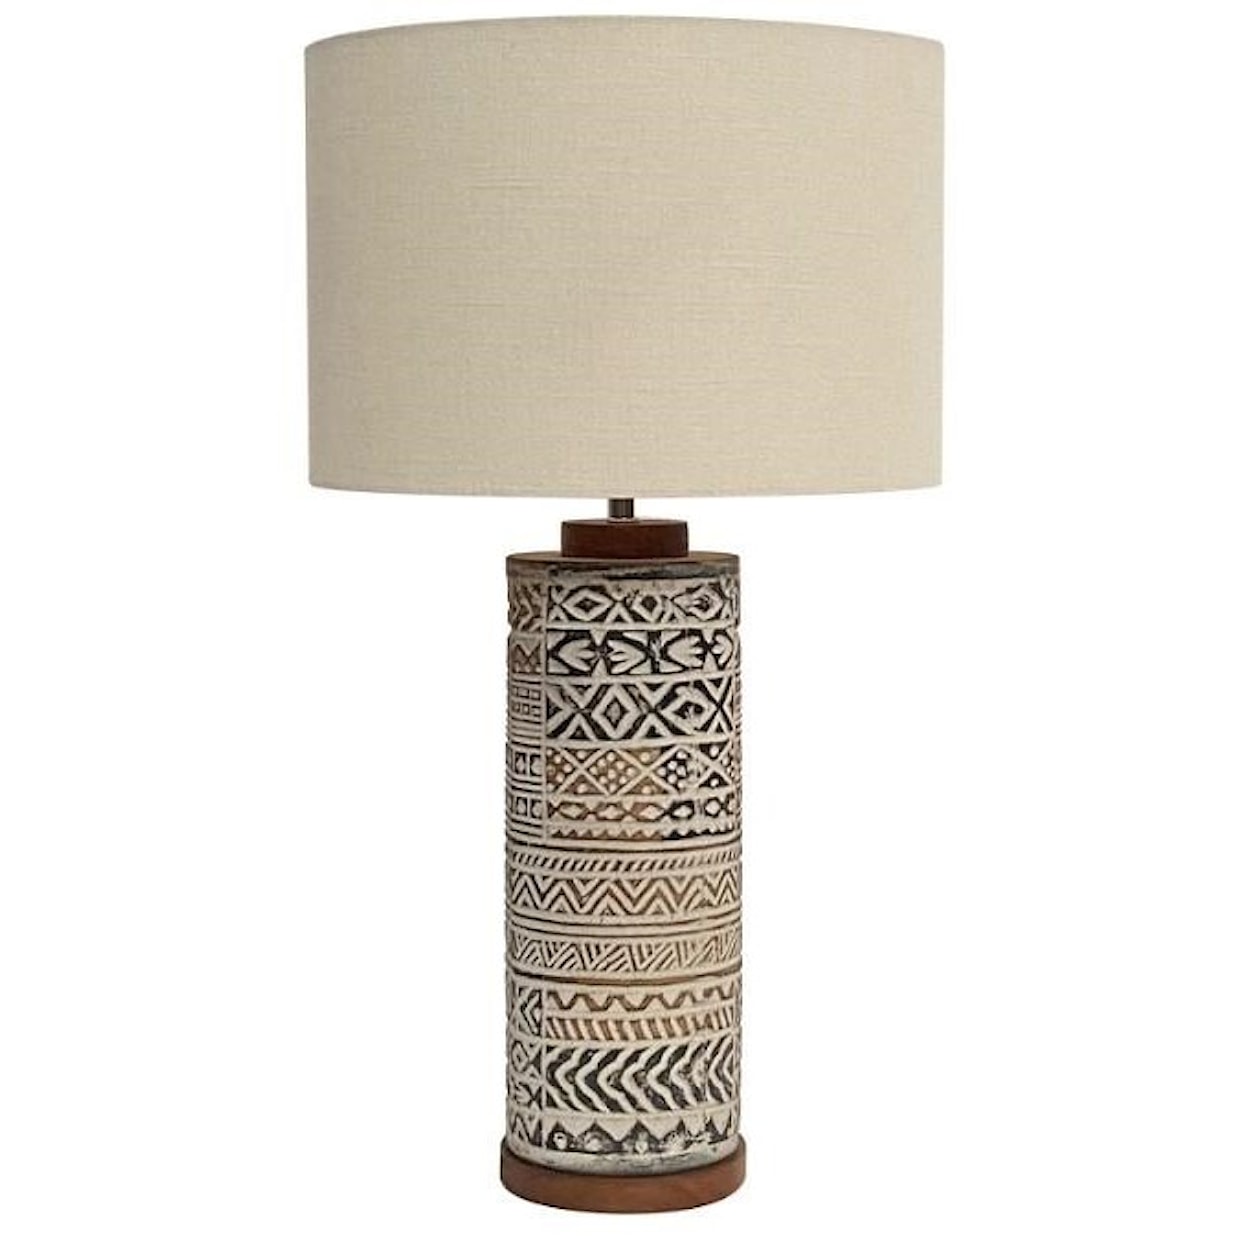 Crestview Collection Lighting Taos Carved Table Lamp